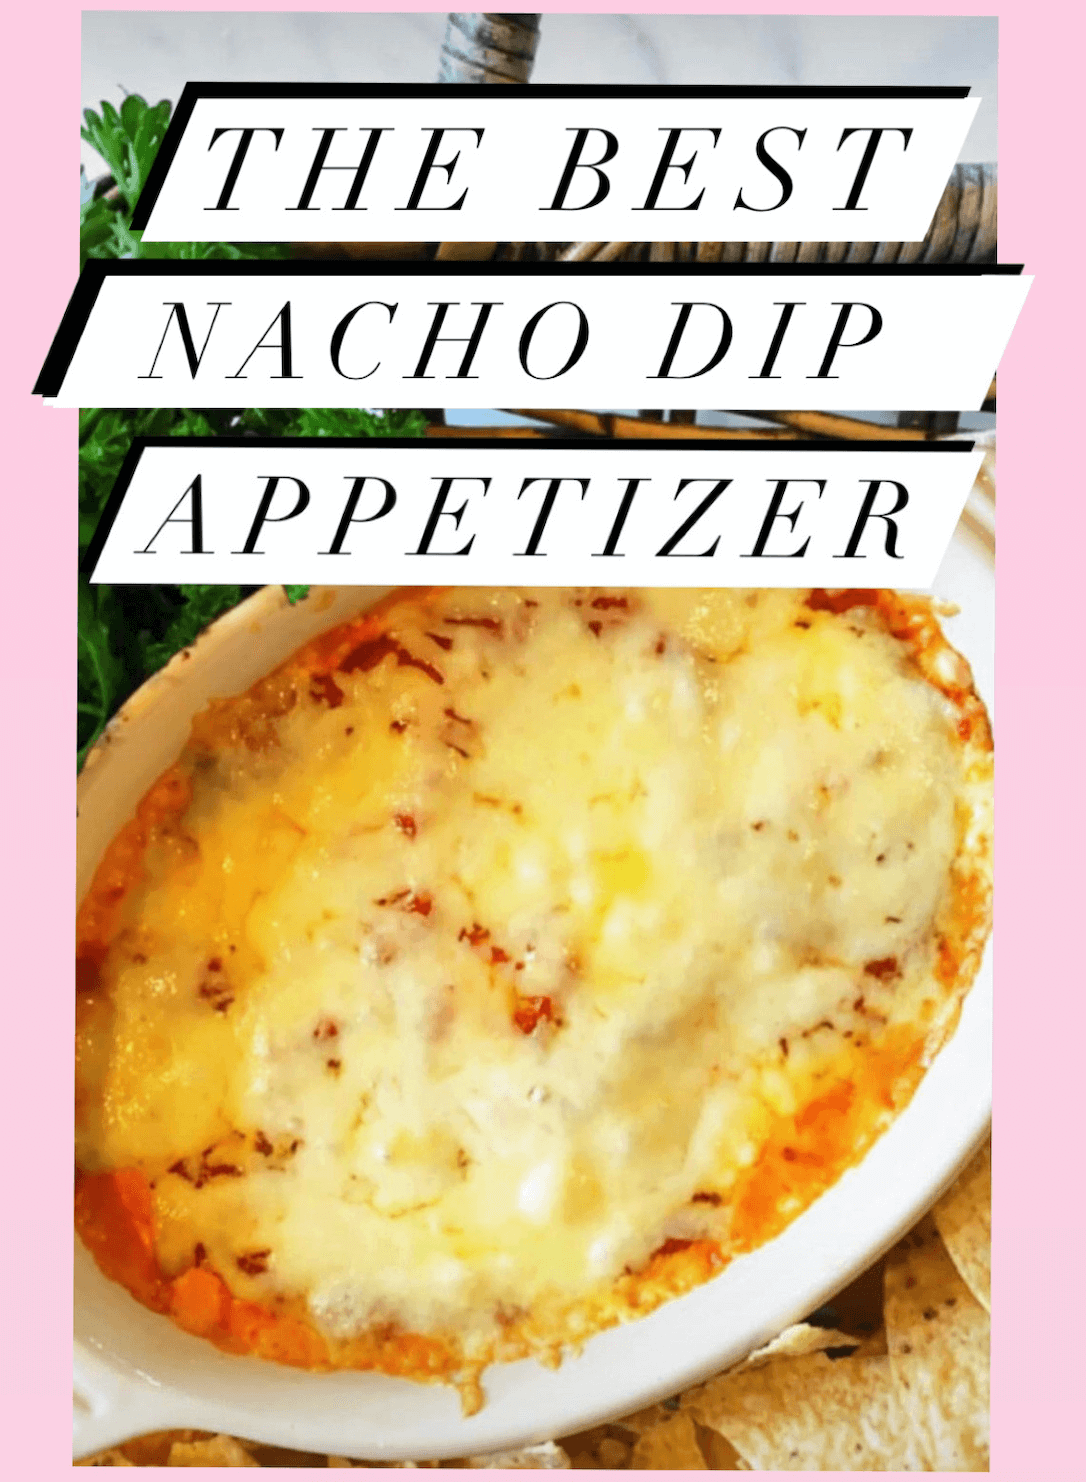 Close up of the Nacho Dip with the caption "the best nacho dip appetizer"